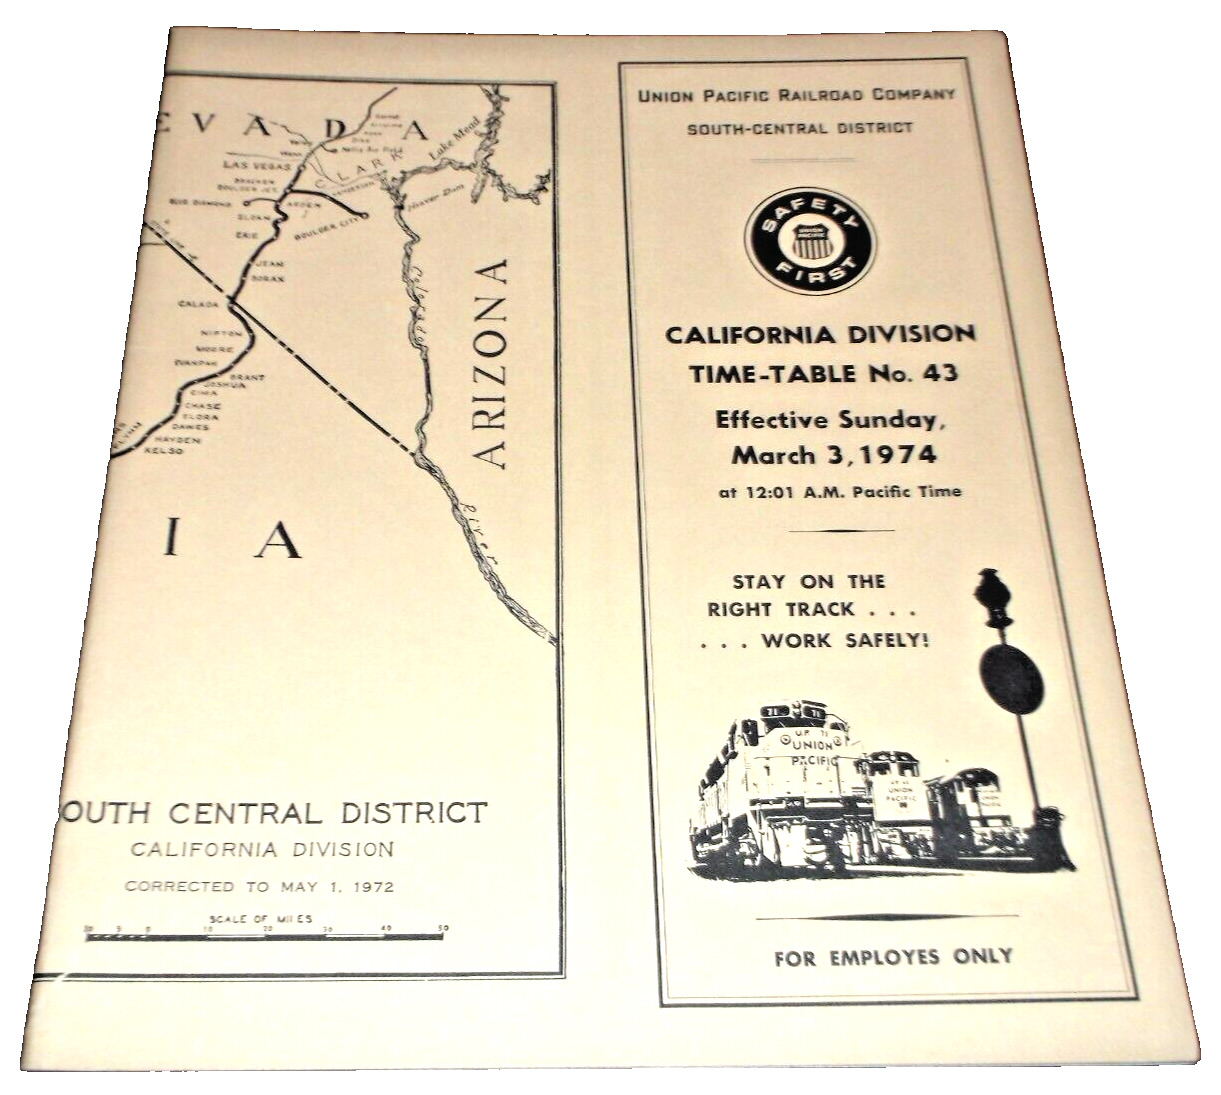 MARCH 1974 UNION PACIFIC CALIFORNIA DIVISION EMPLOYEE TIMETABLE #43